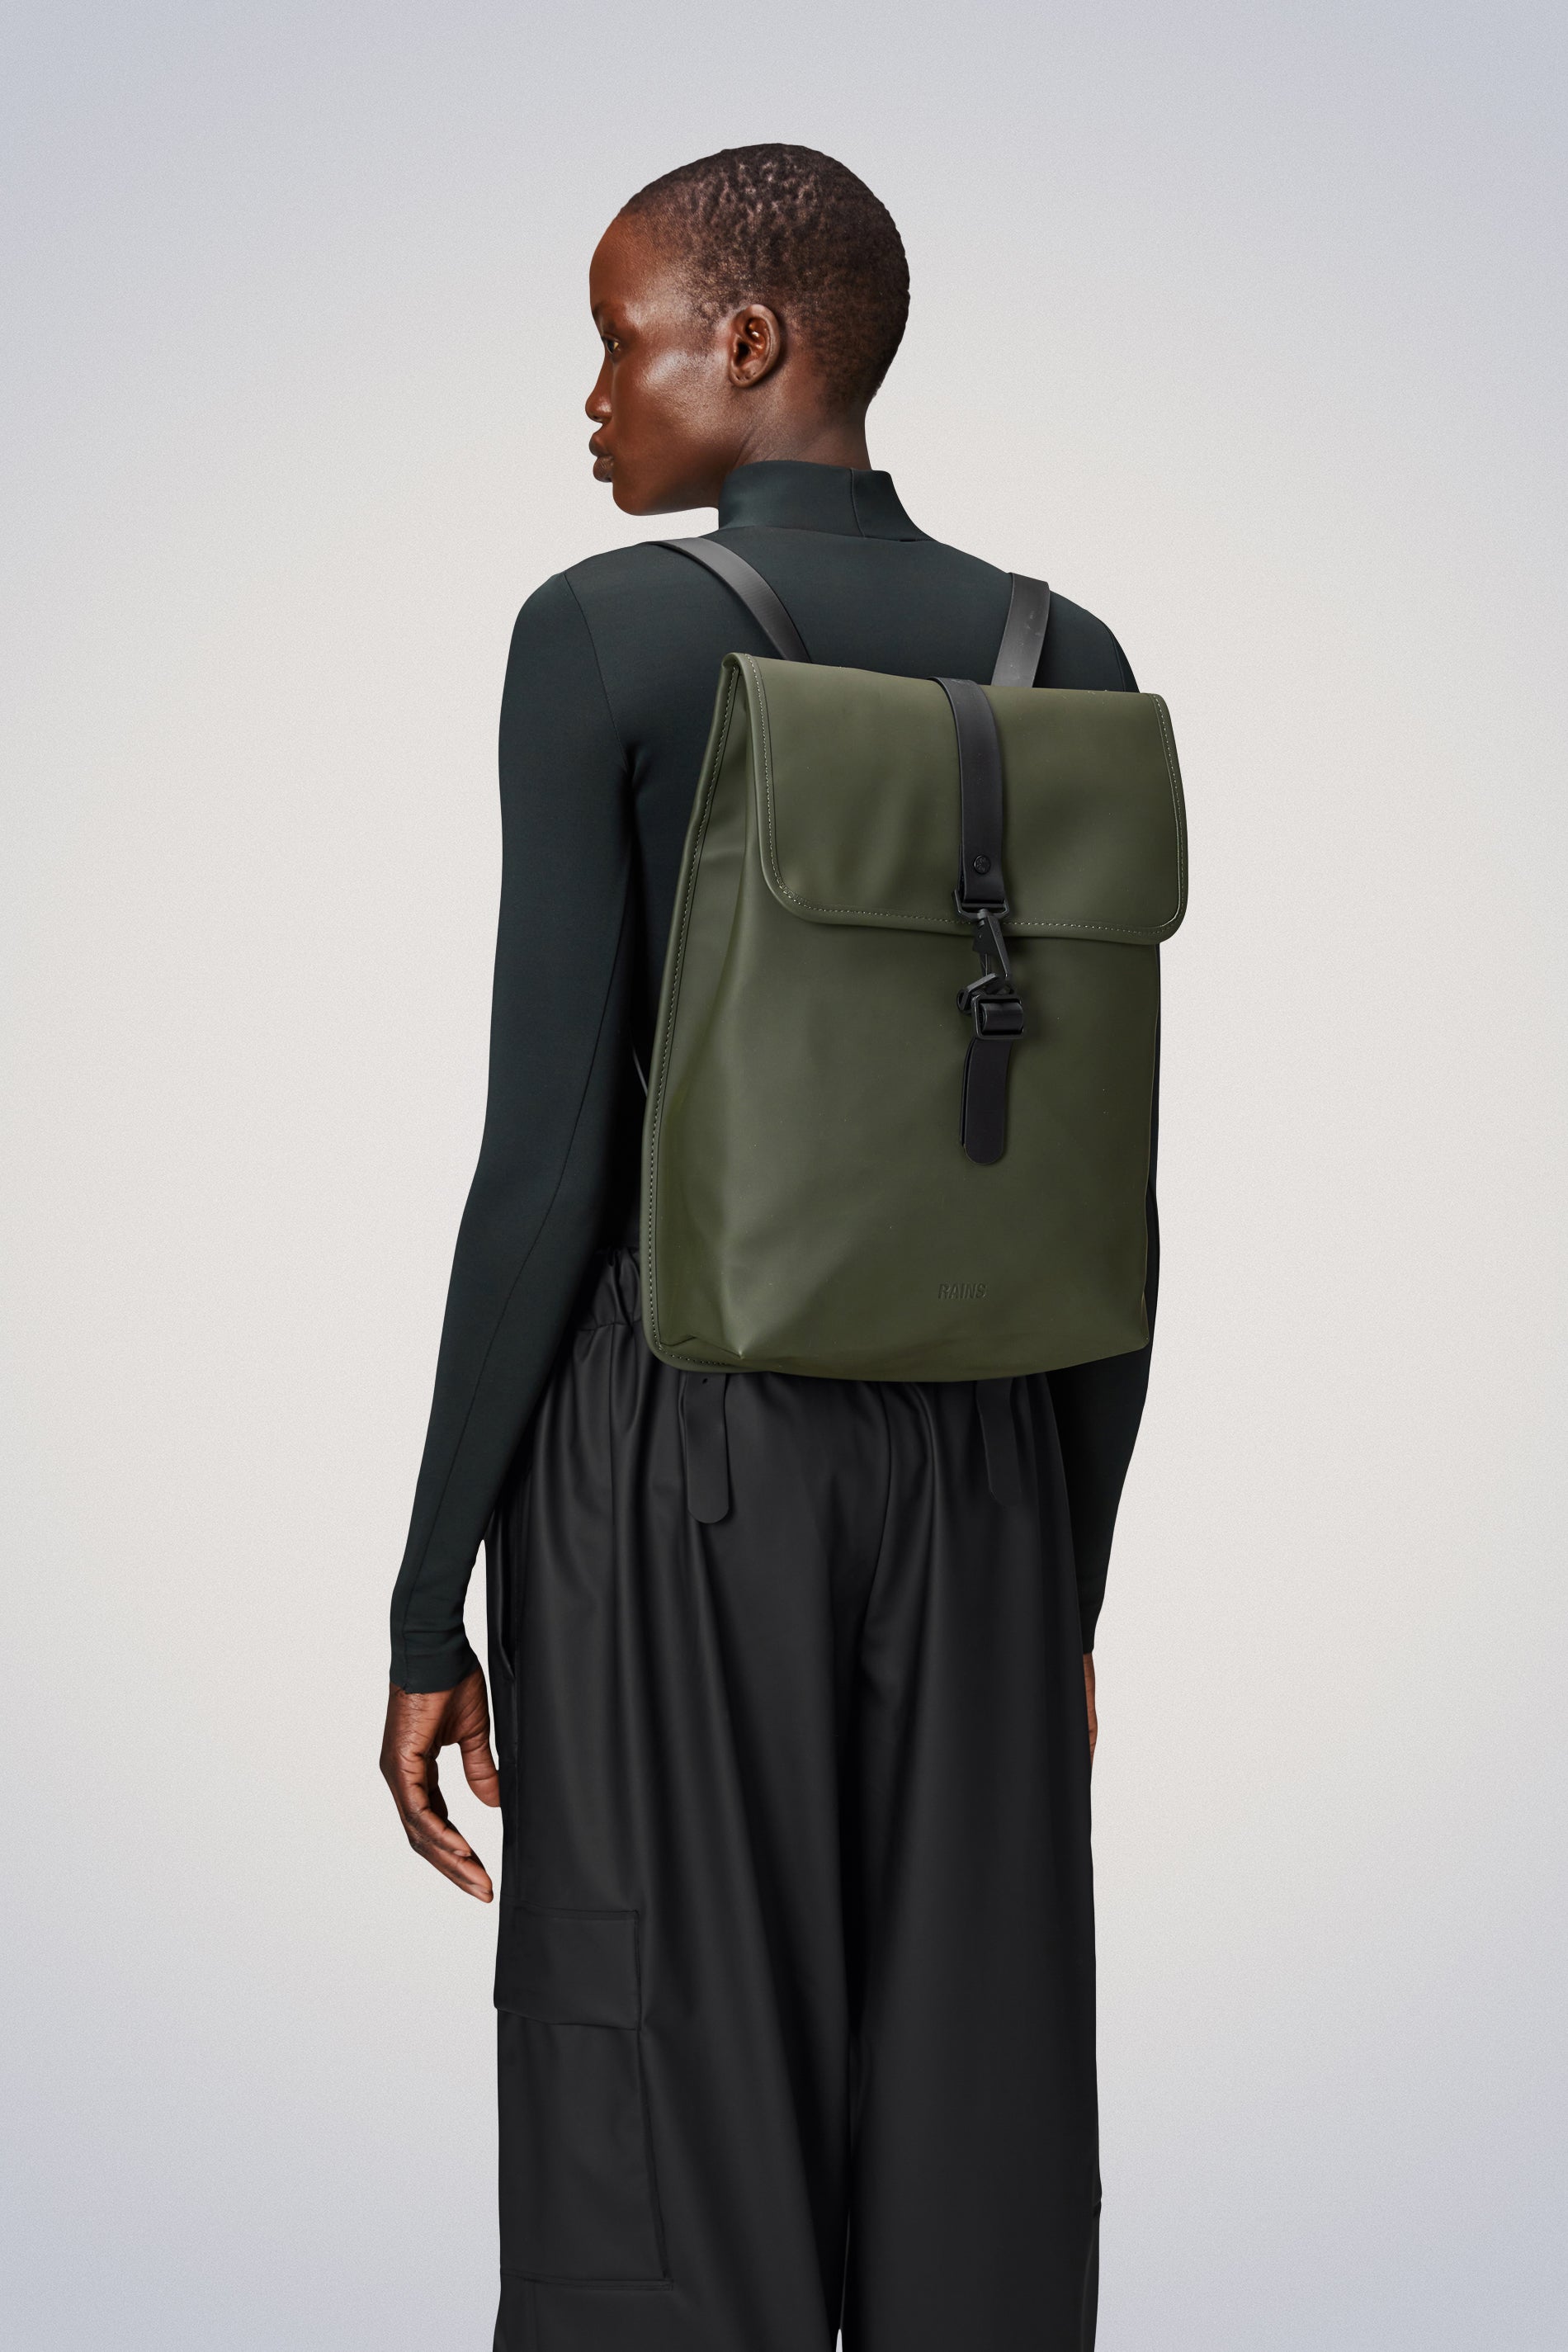 Rains® Rolltop Rucksack in Black for $140 | Free Shipping